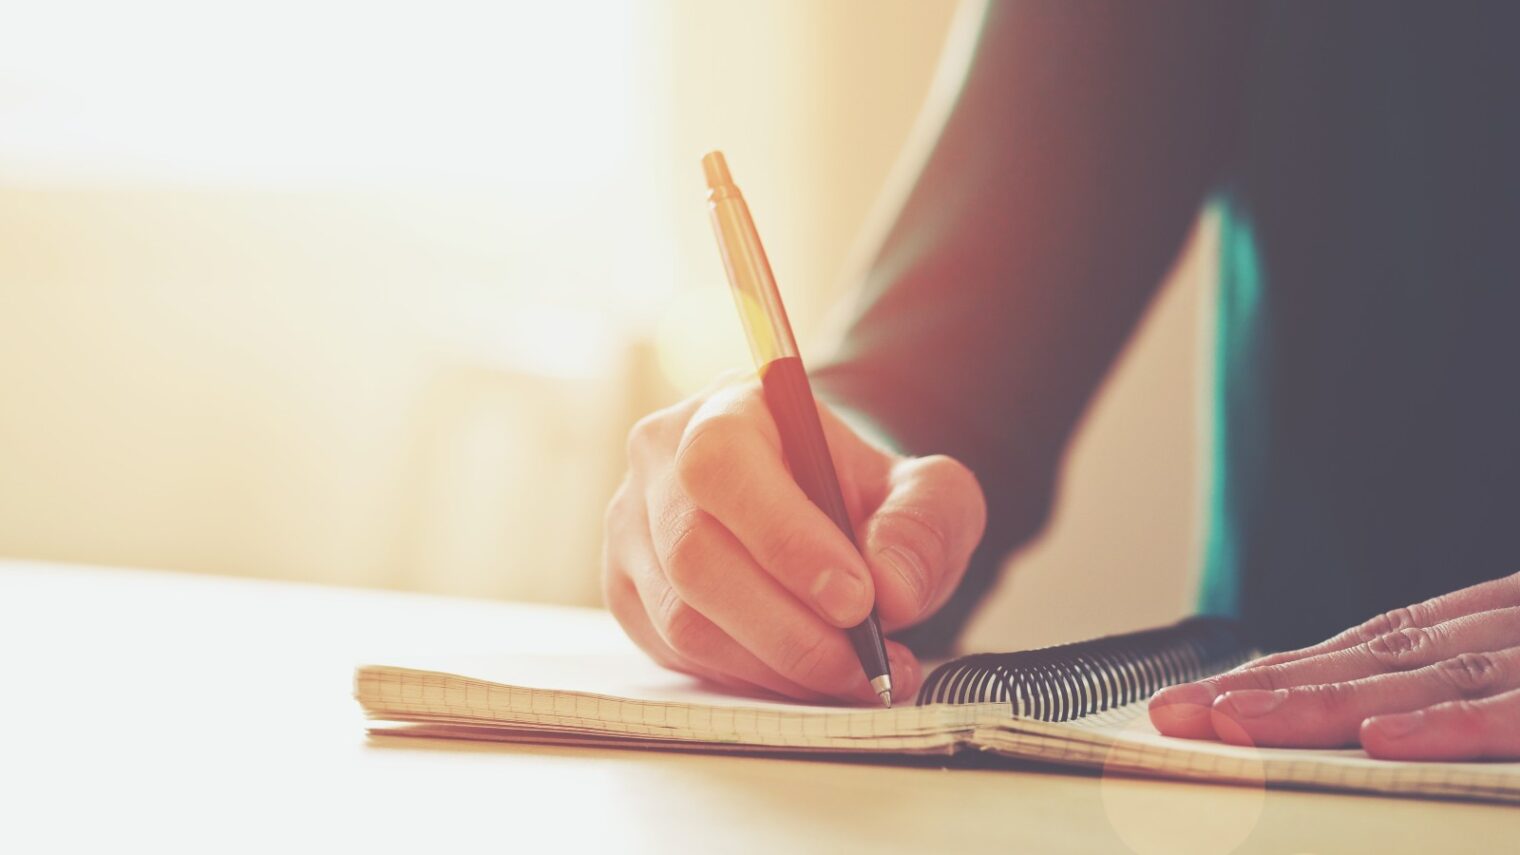 Your proposed beloved’s handwriting can tell a lot about their character, traits and state of mind. Photo by Ivan Kruk via Shutterstock.com